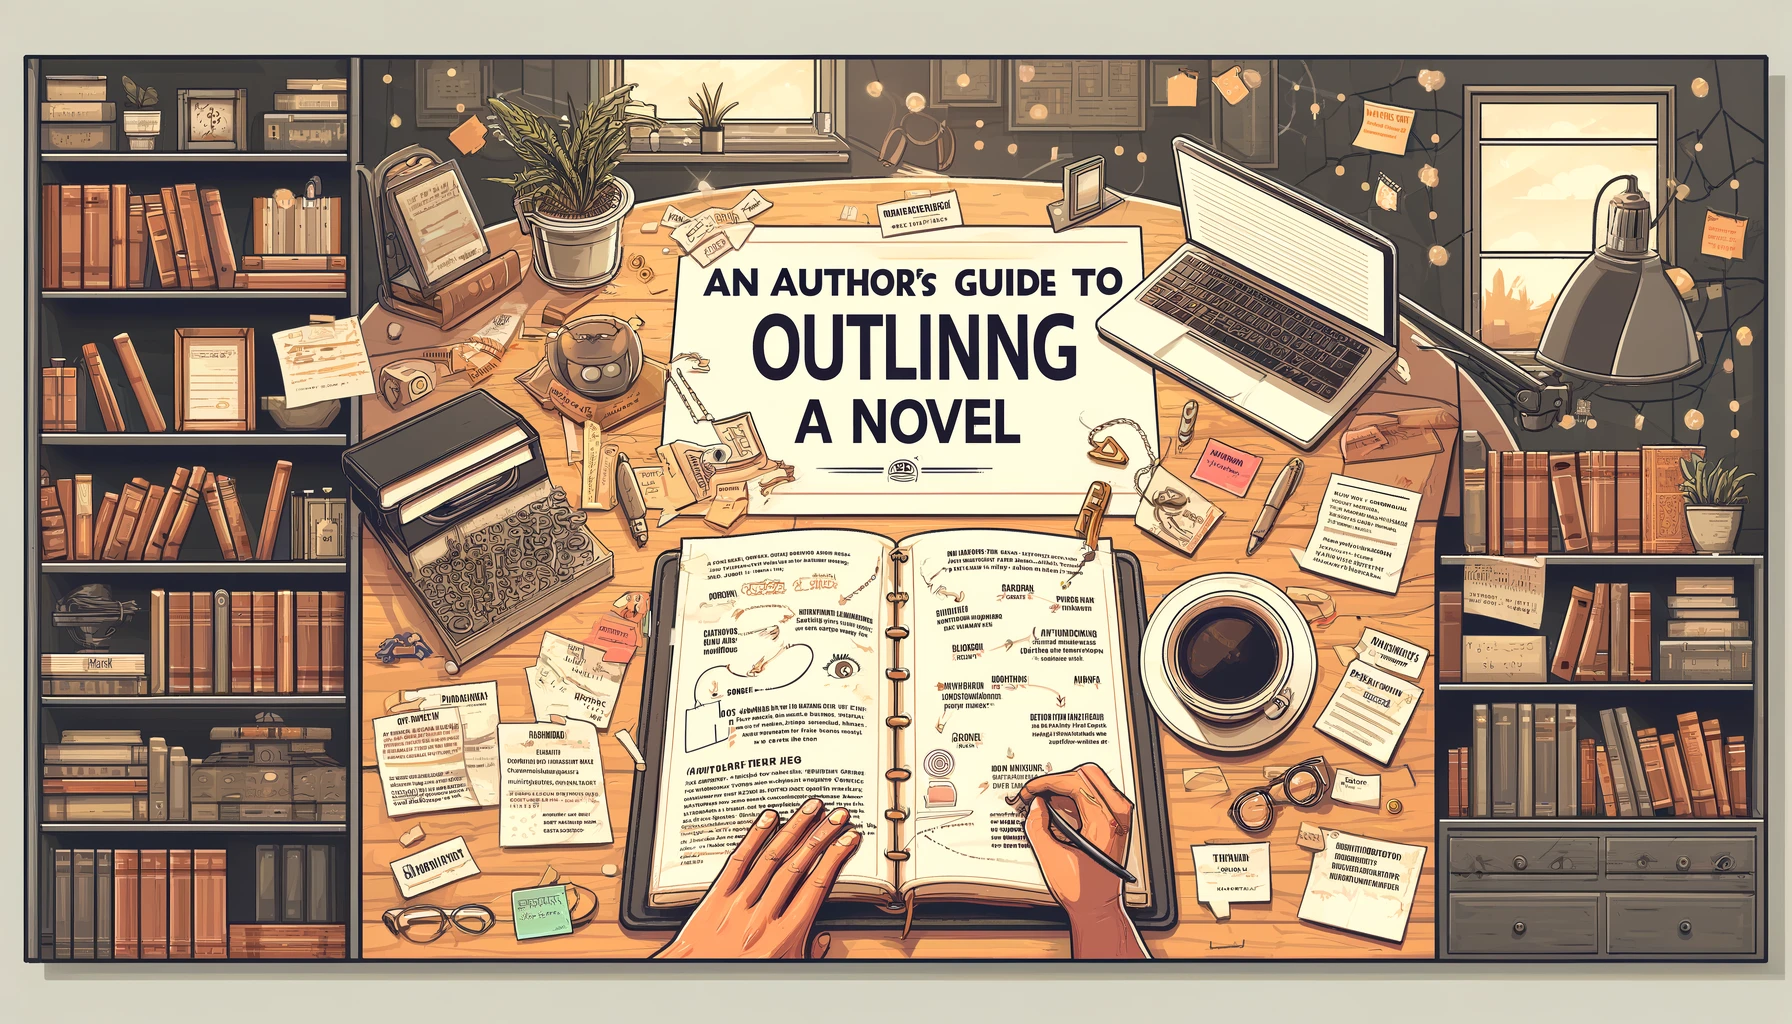 An Author’s Guide to Outlining a Novel